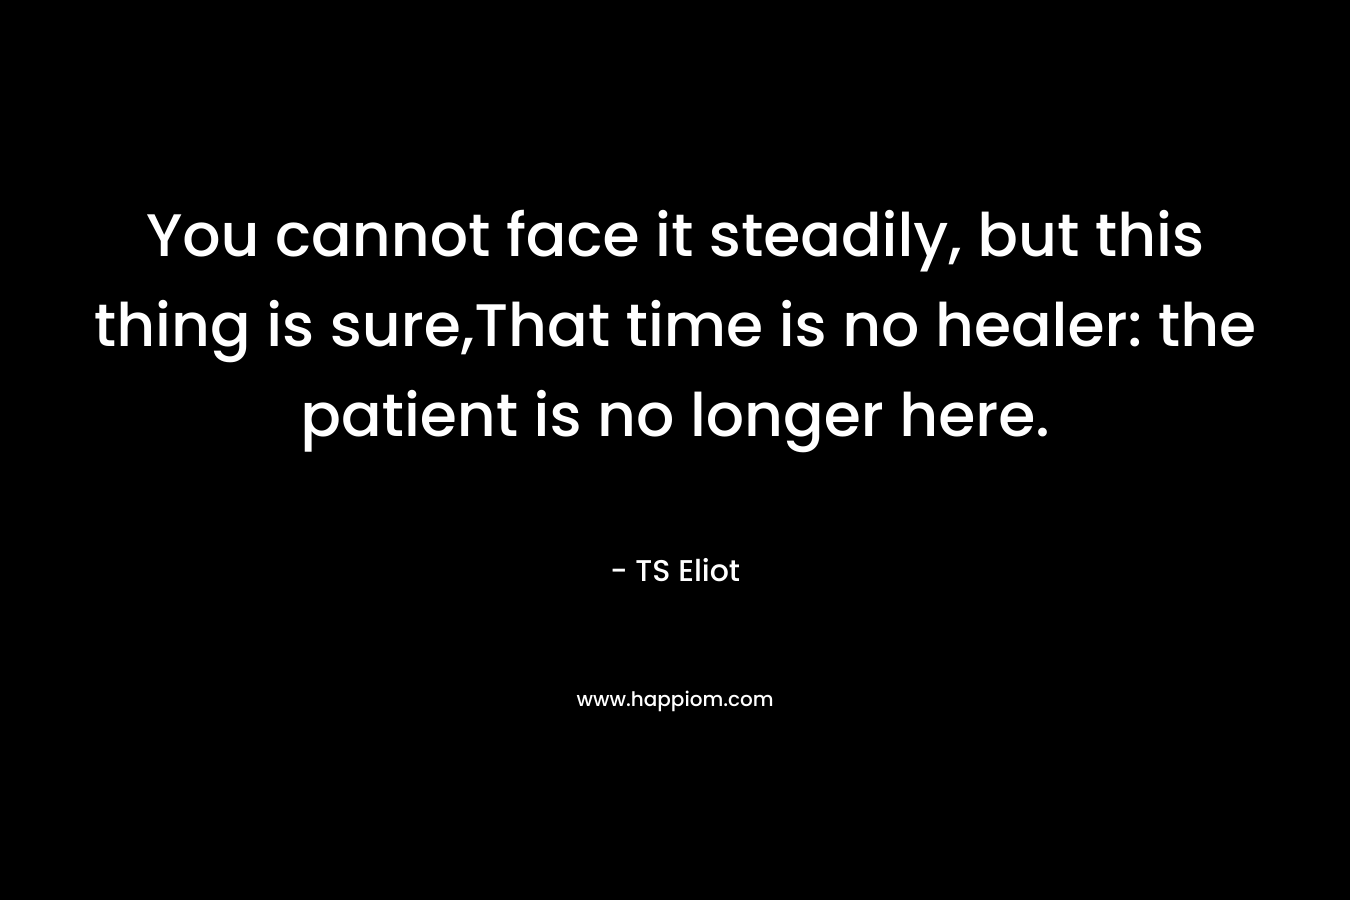 You cannot face it steadily, but this thing is sure,That time is no healer: the patient is no longer here. – TS Eliot